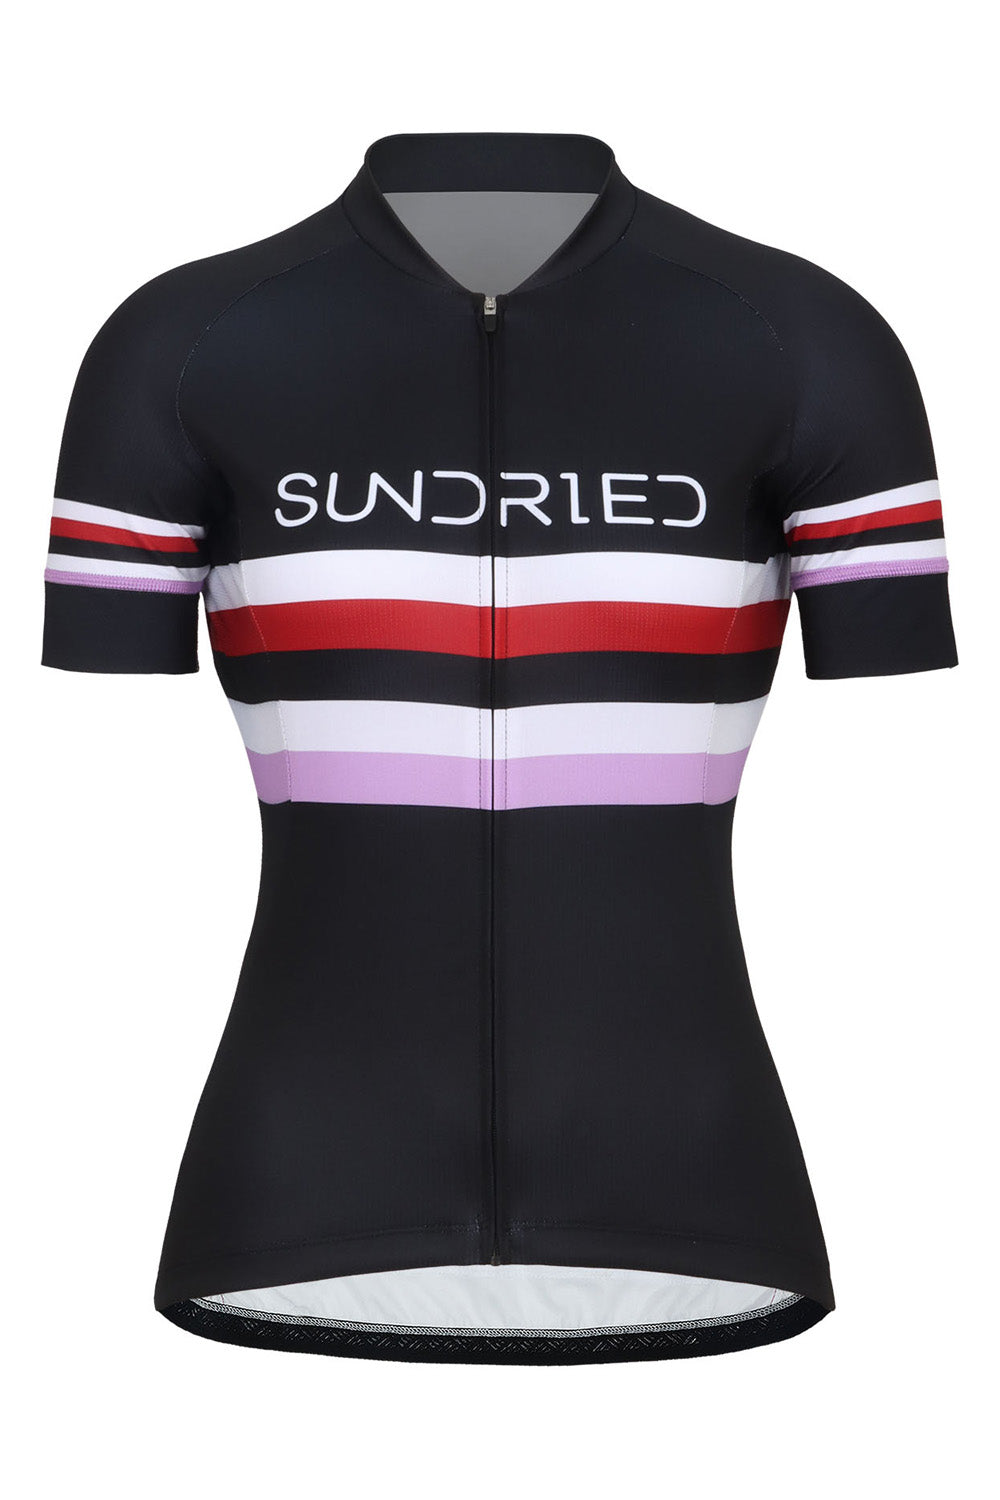 Sundried Stealth Women's Short Sleeved Cycle Training Jersey Short Sleeve Jersey XS Black SD0515 XS Black Activewear